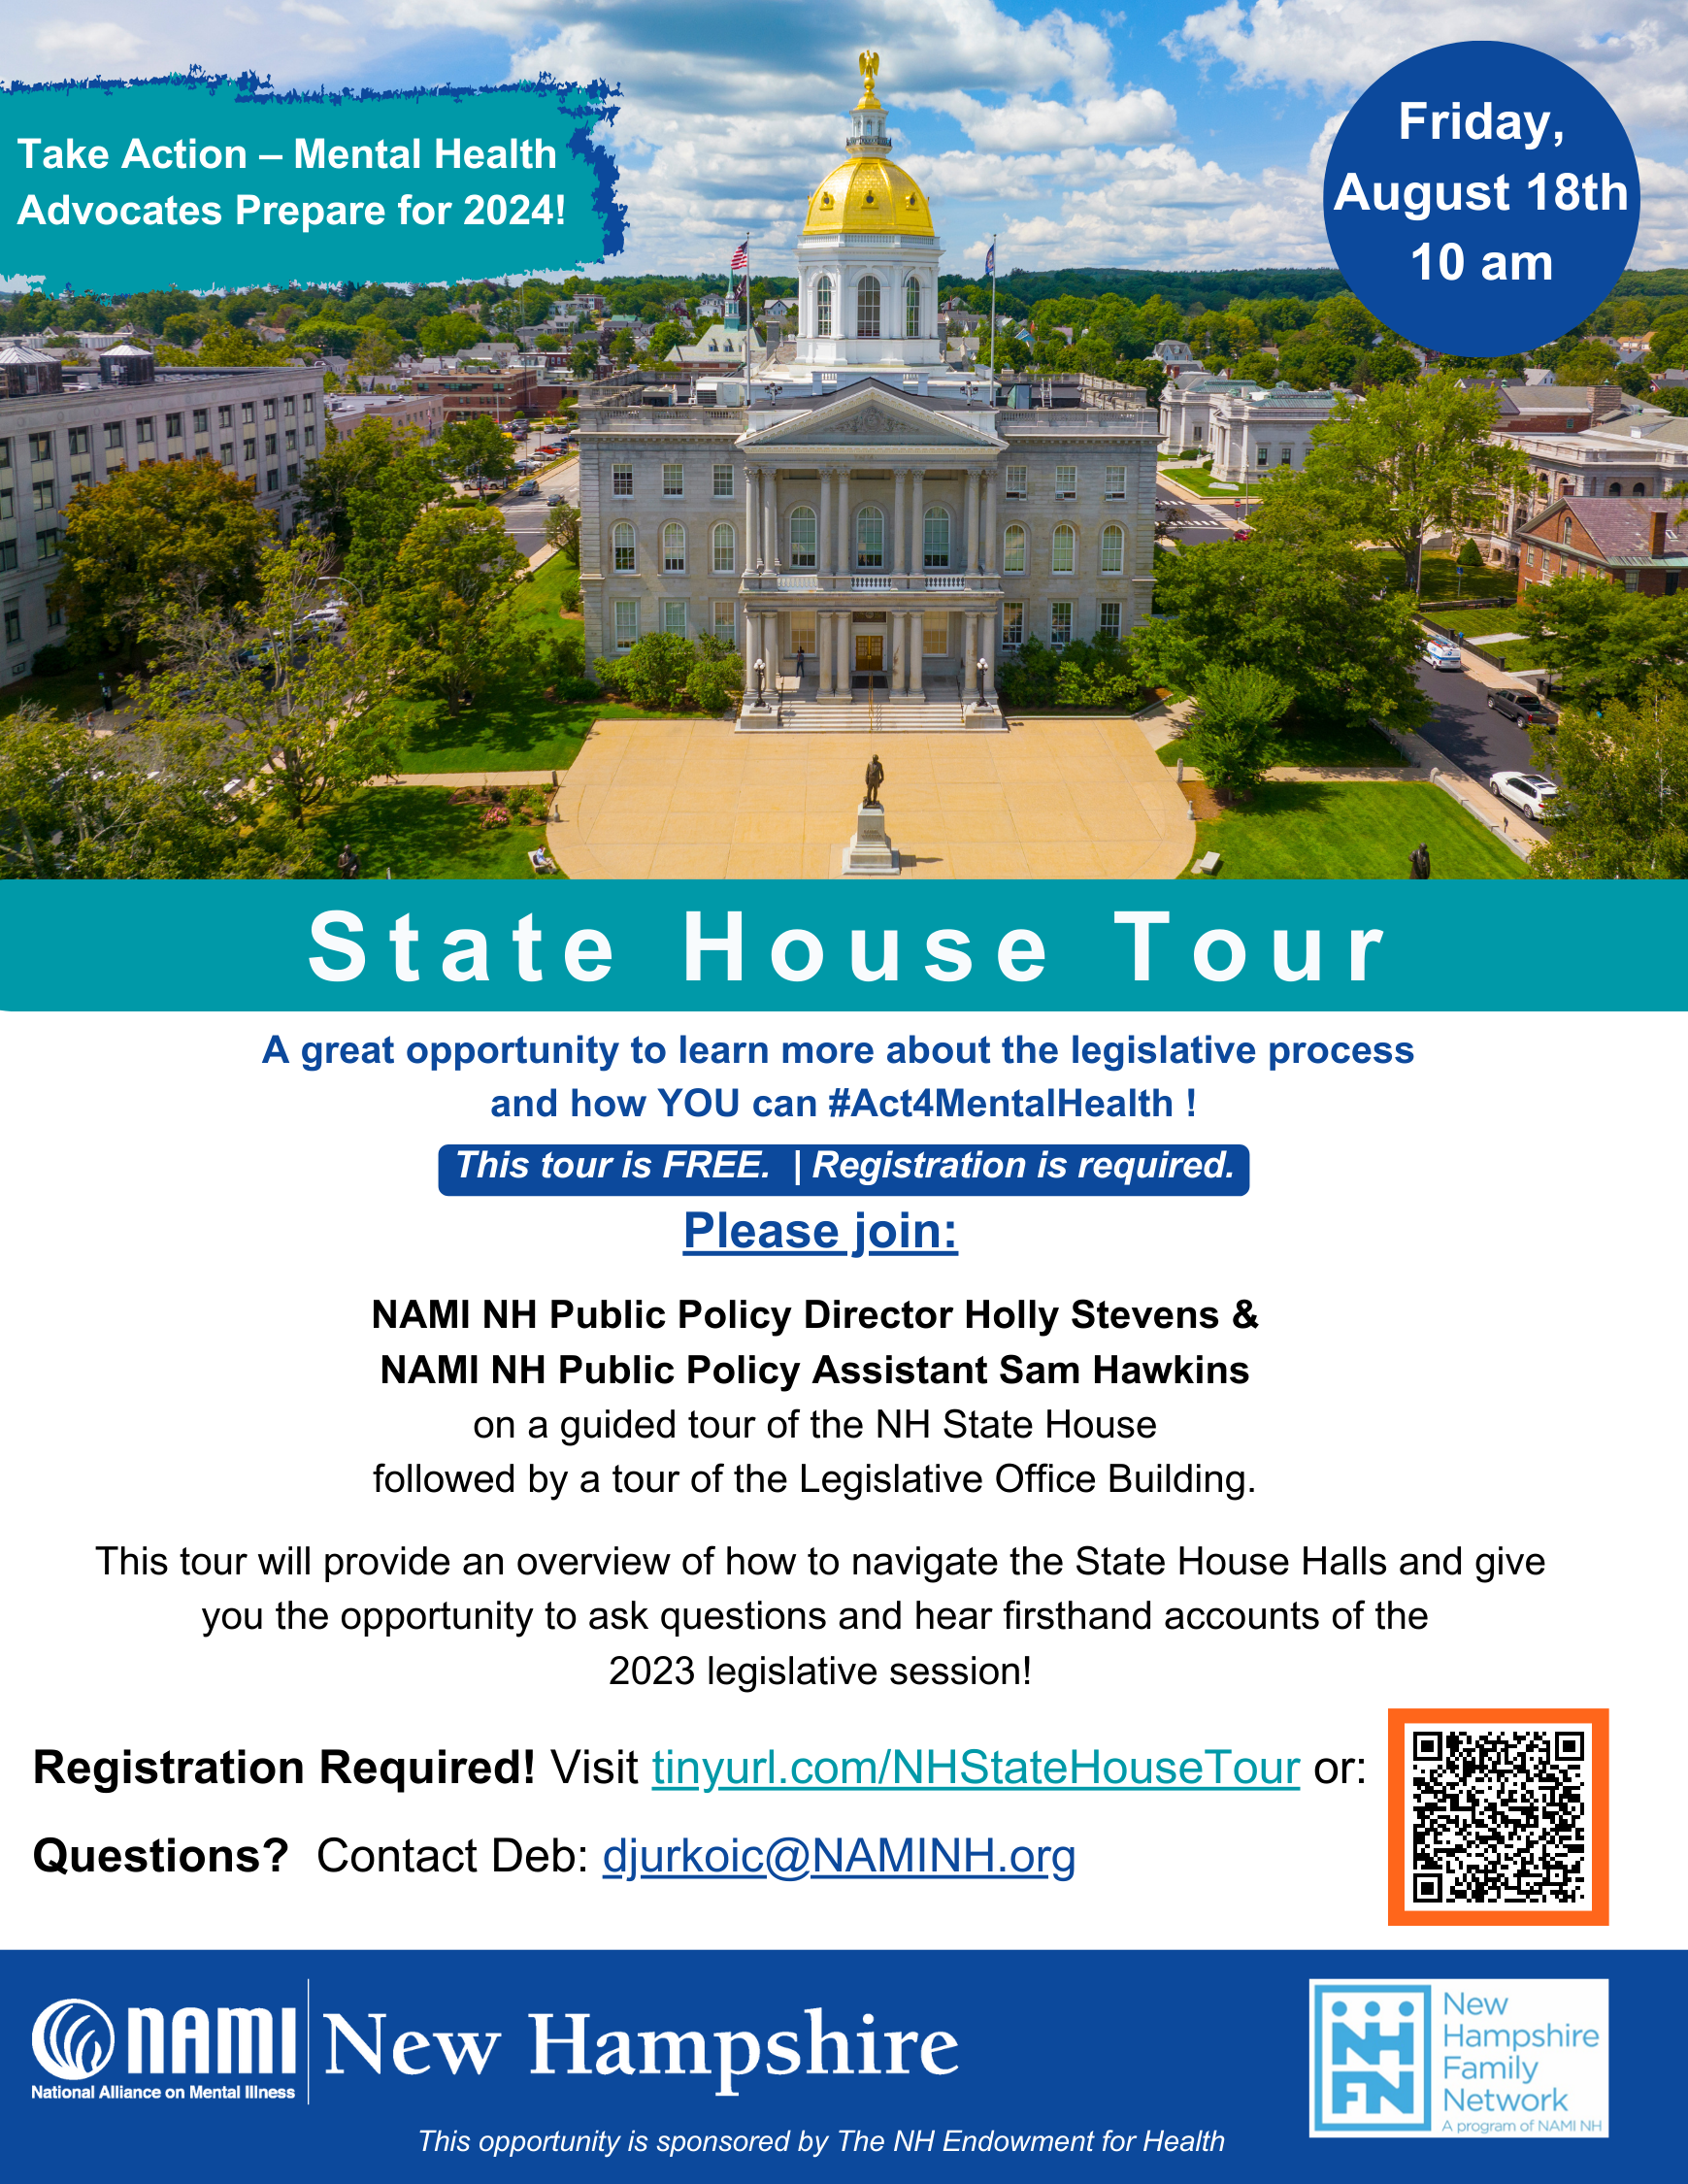 State House Tour